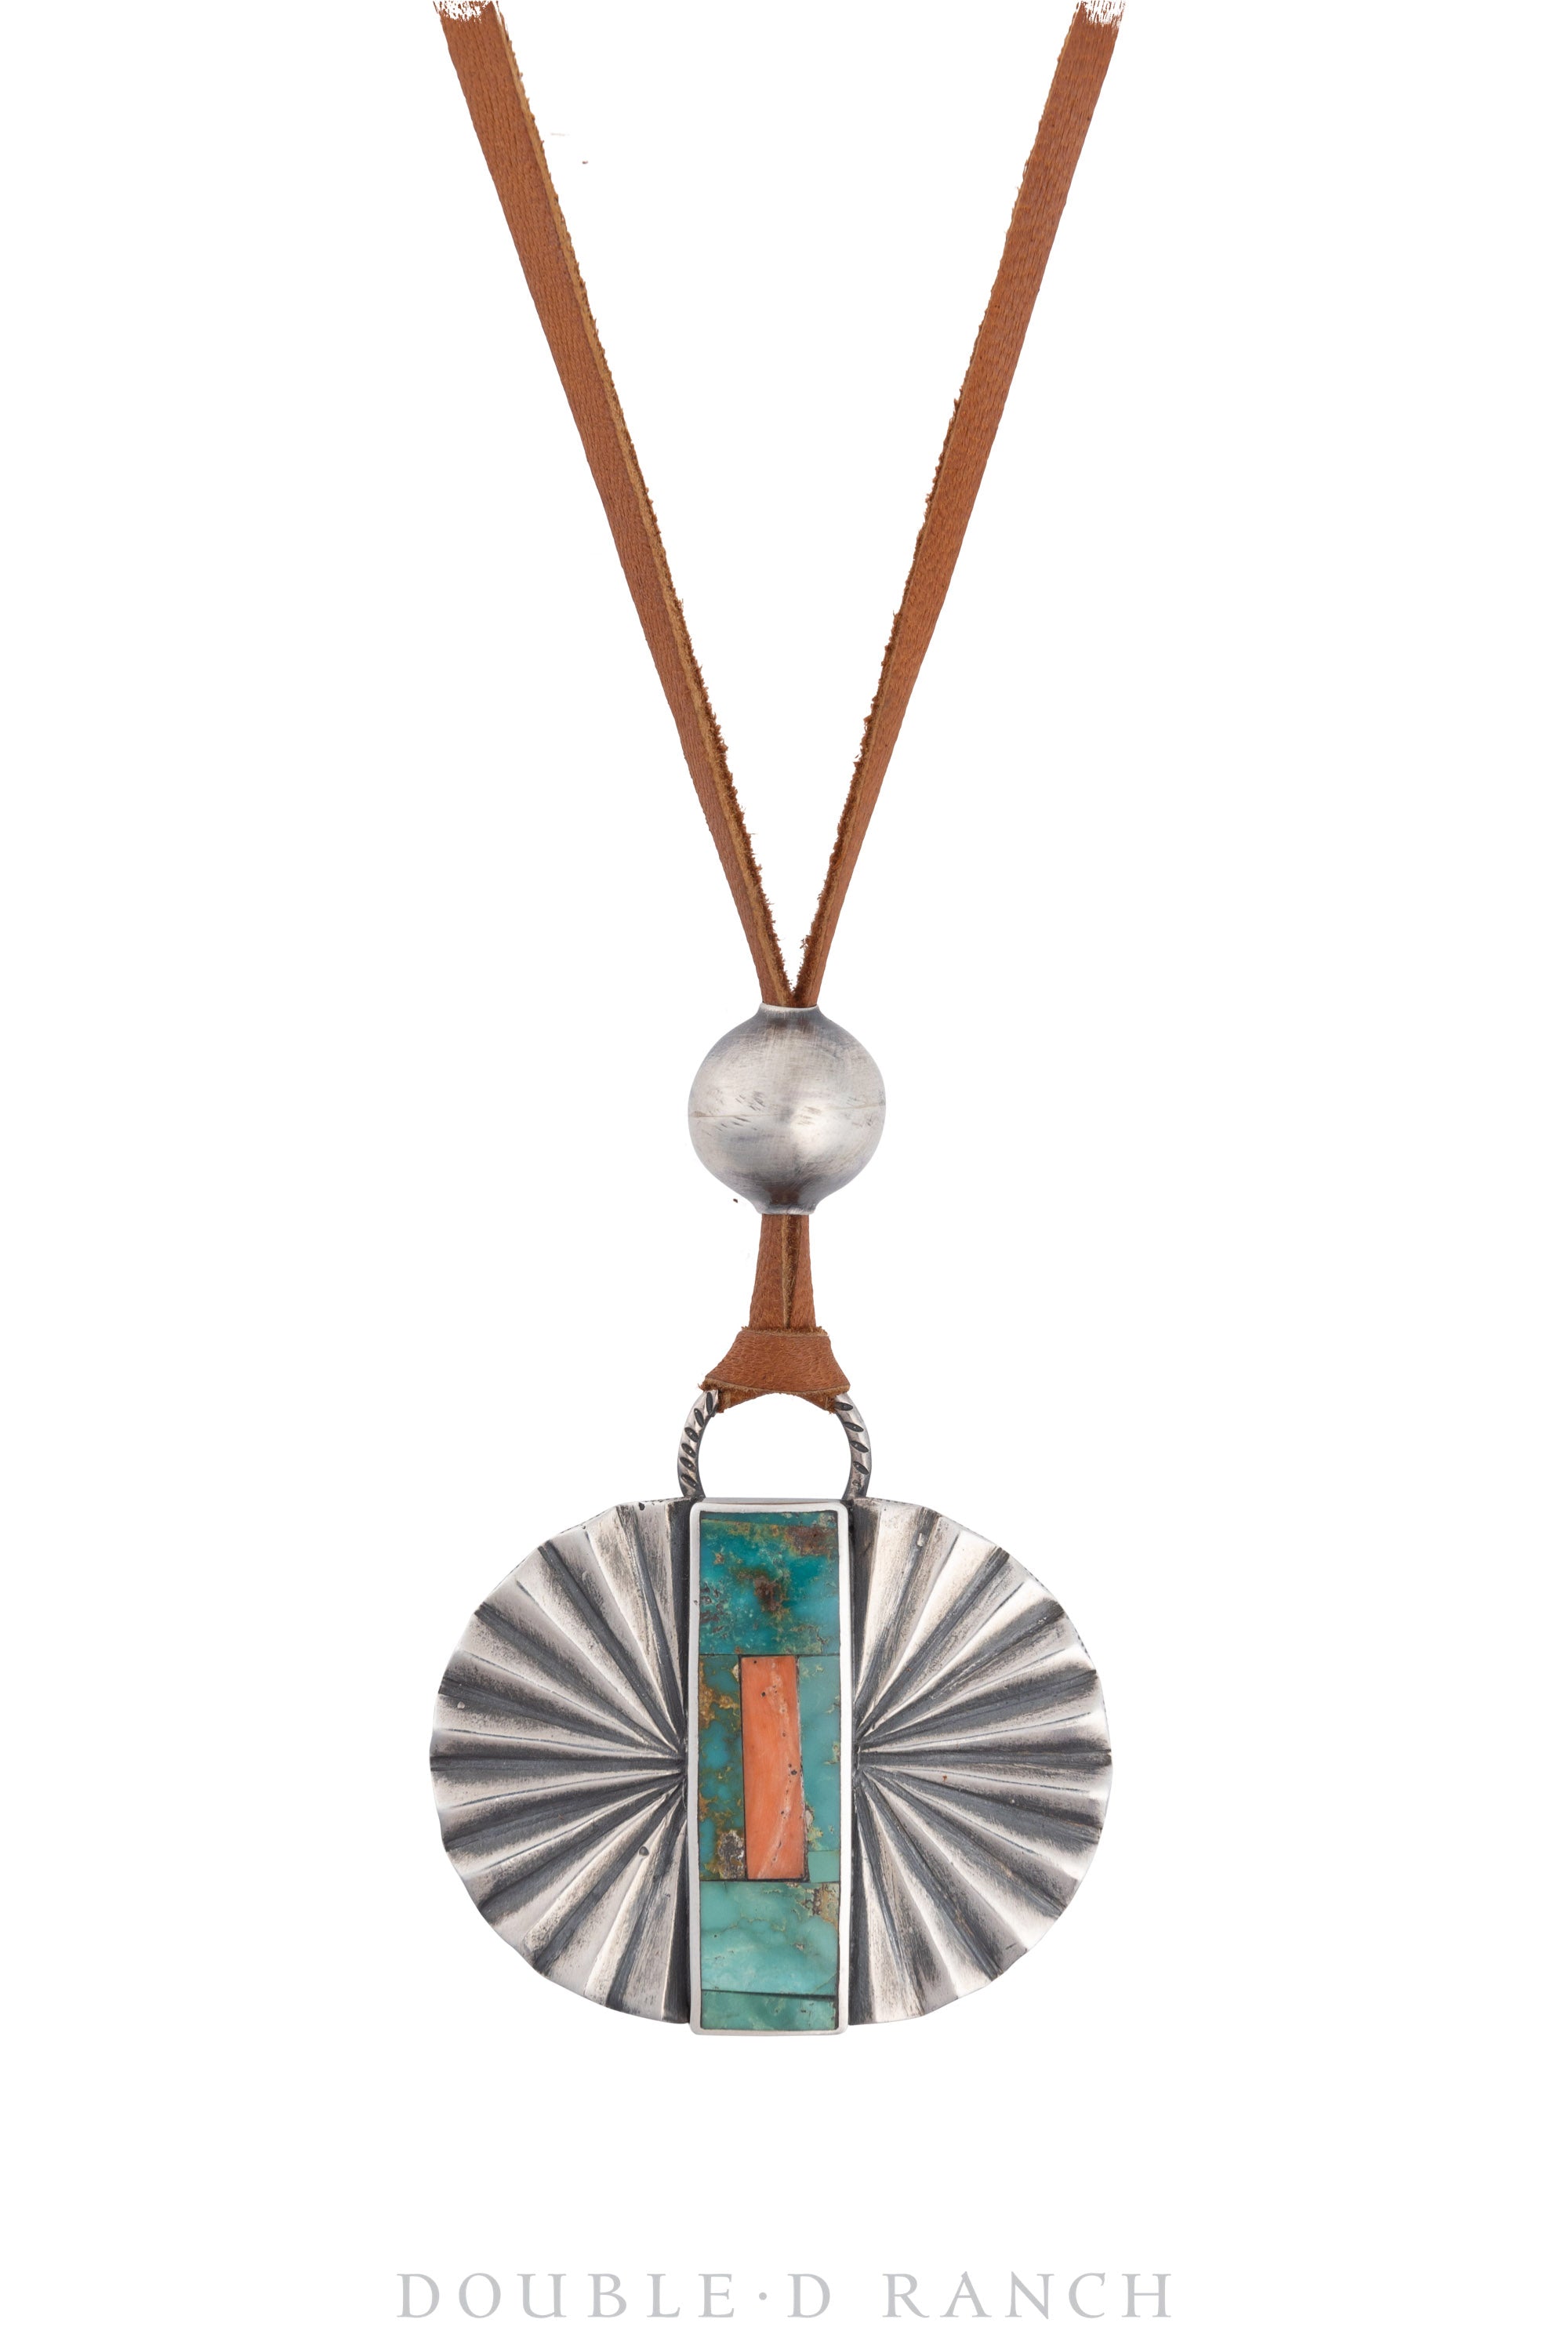 Necklace, Jesse Robbins, Leather Thong, Turquoise & Orange Spiny Oyster, Morgan Silver Dollar Coin, Hallmark, Contemporary, 3090